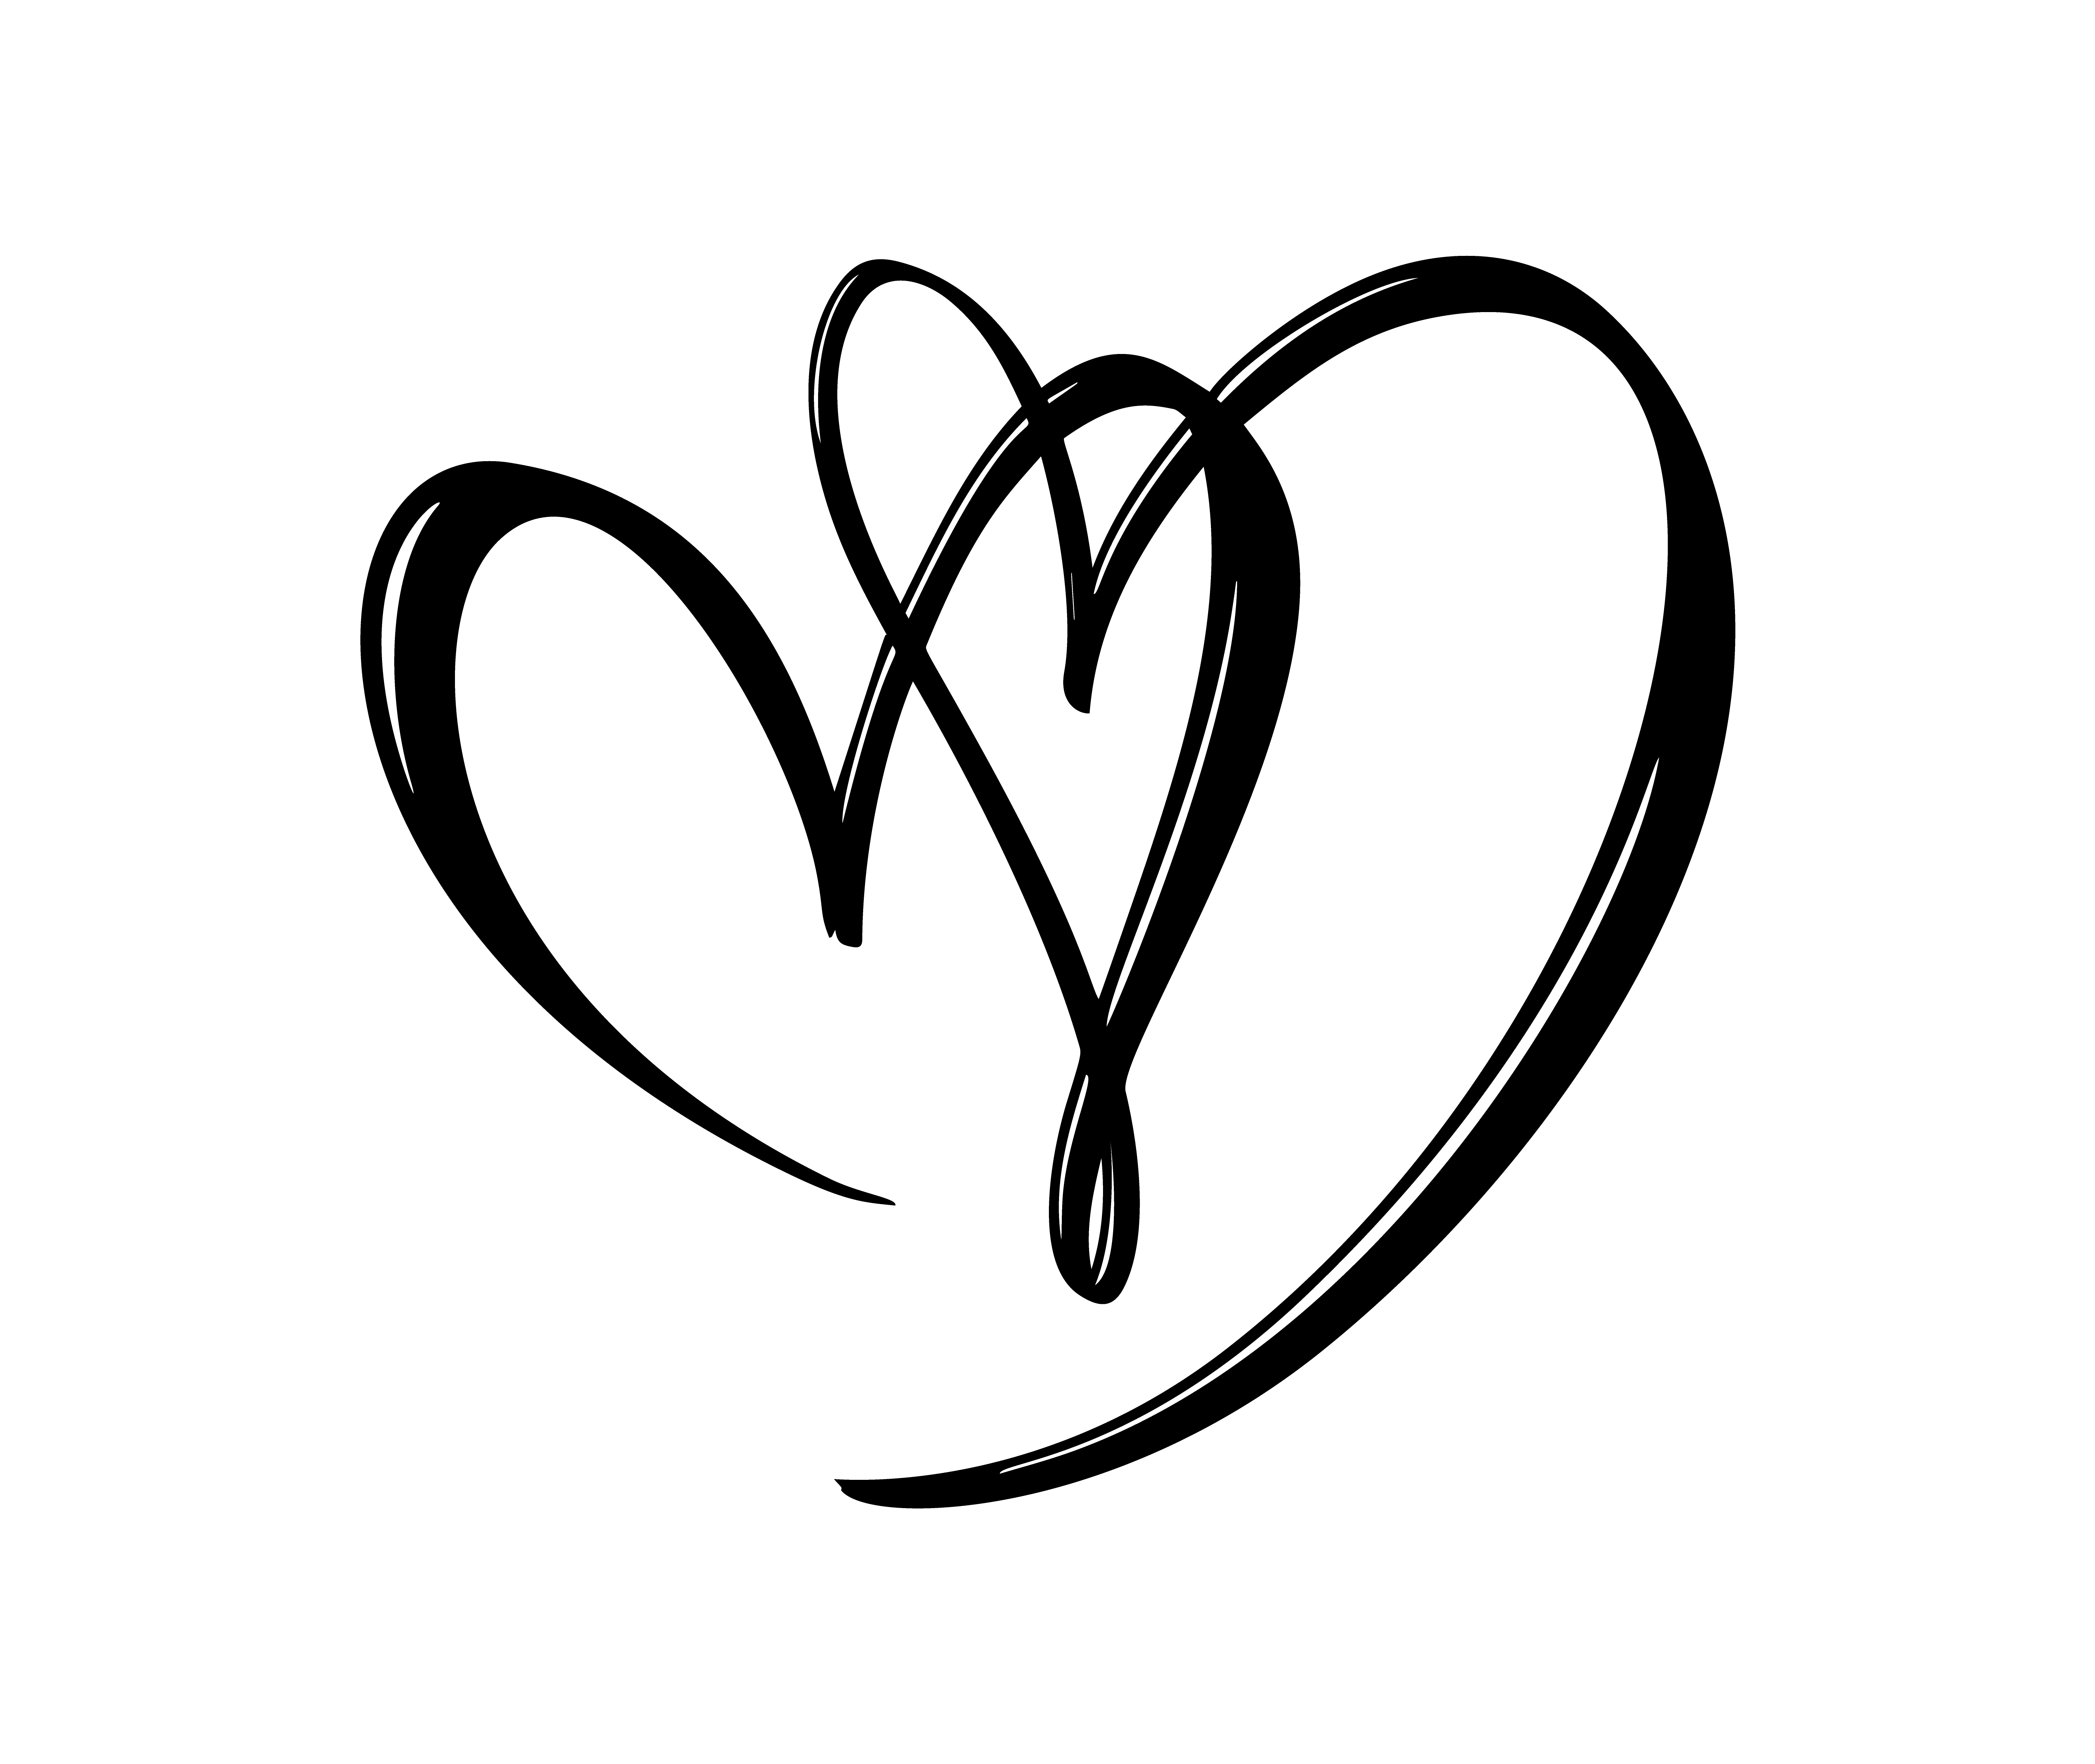 Hand drawn two Heart love sign. Romantic calligraphy vector